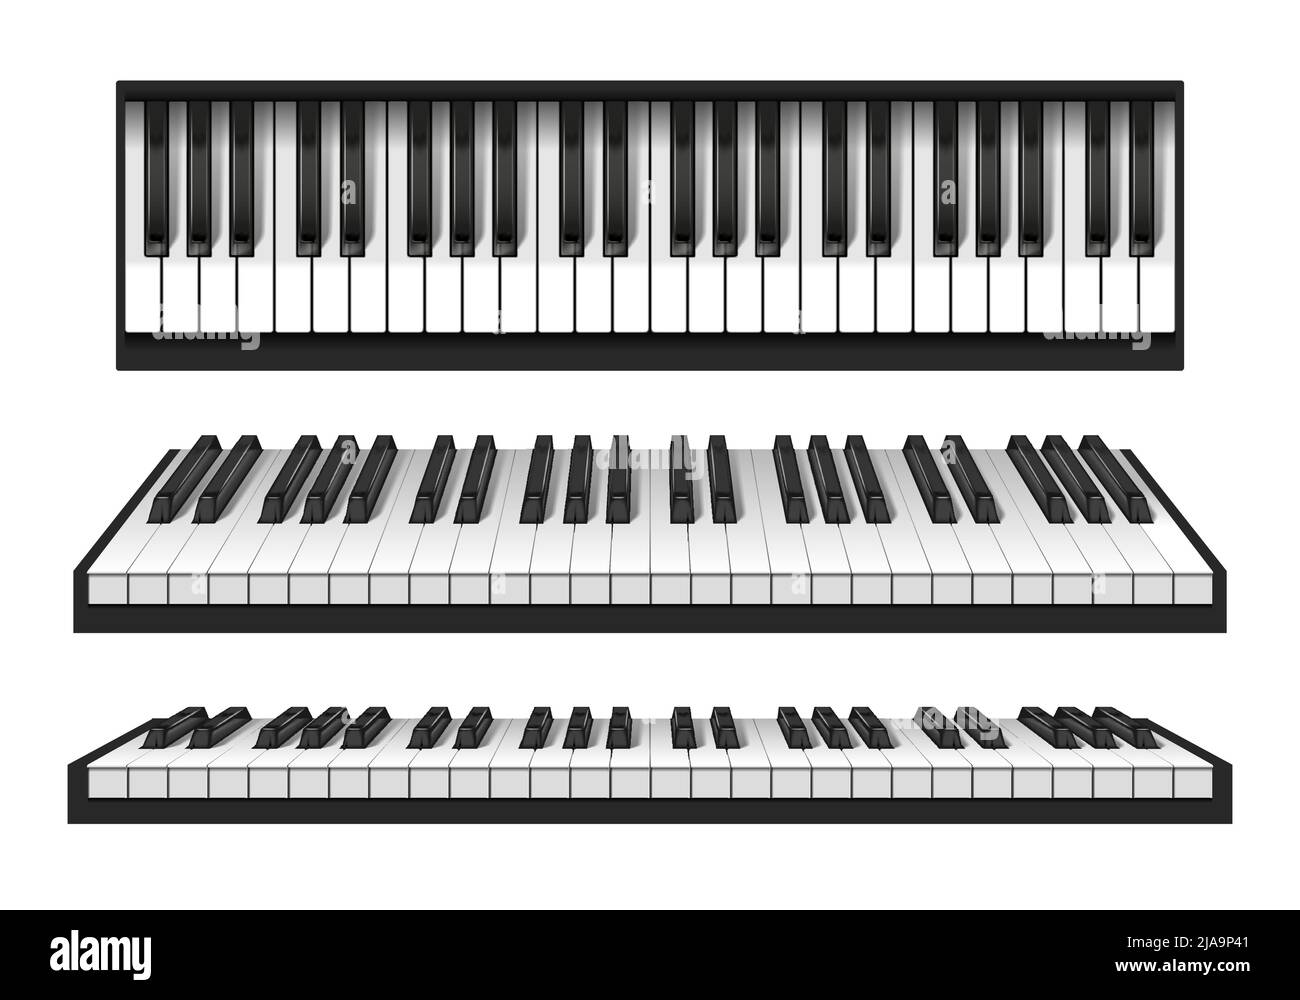 Keyboards of classic piano instrument realistic set isolated on white background vector illustration Stock Vector